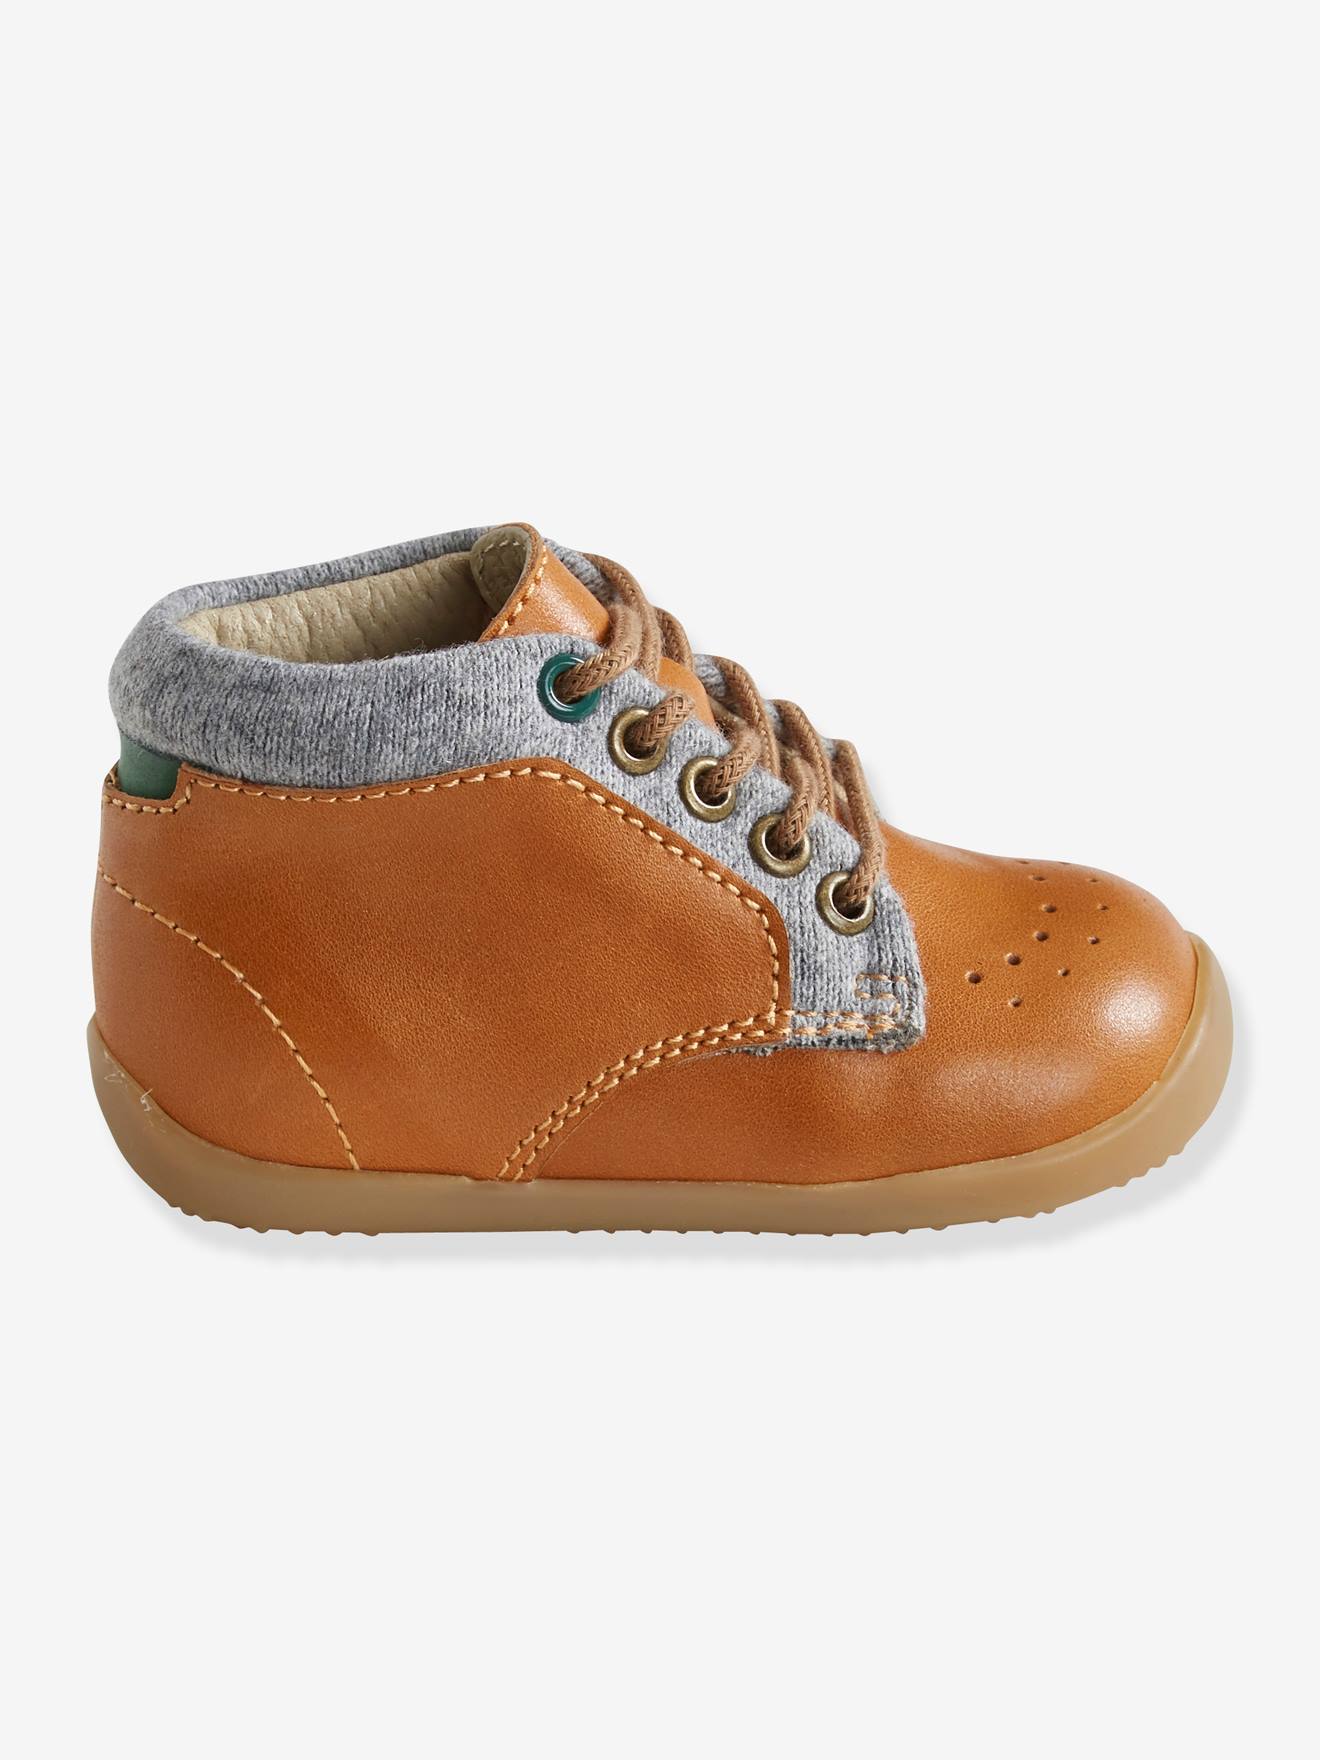 Leather Pram Shoes for Baby Boys 